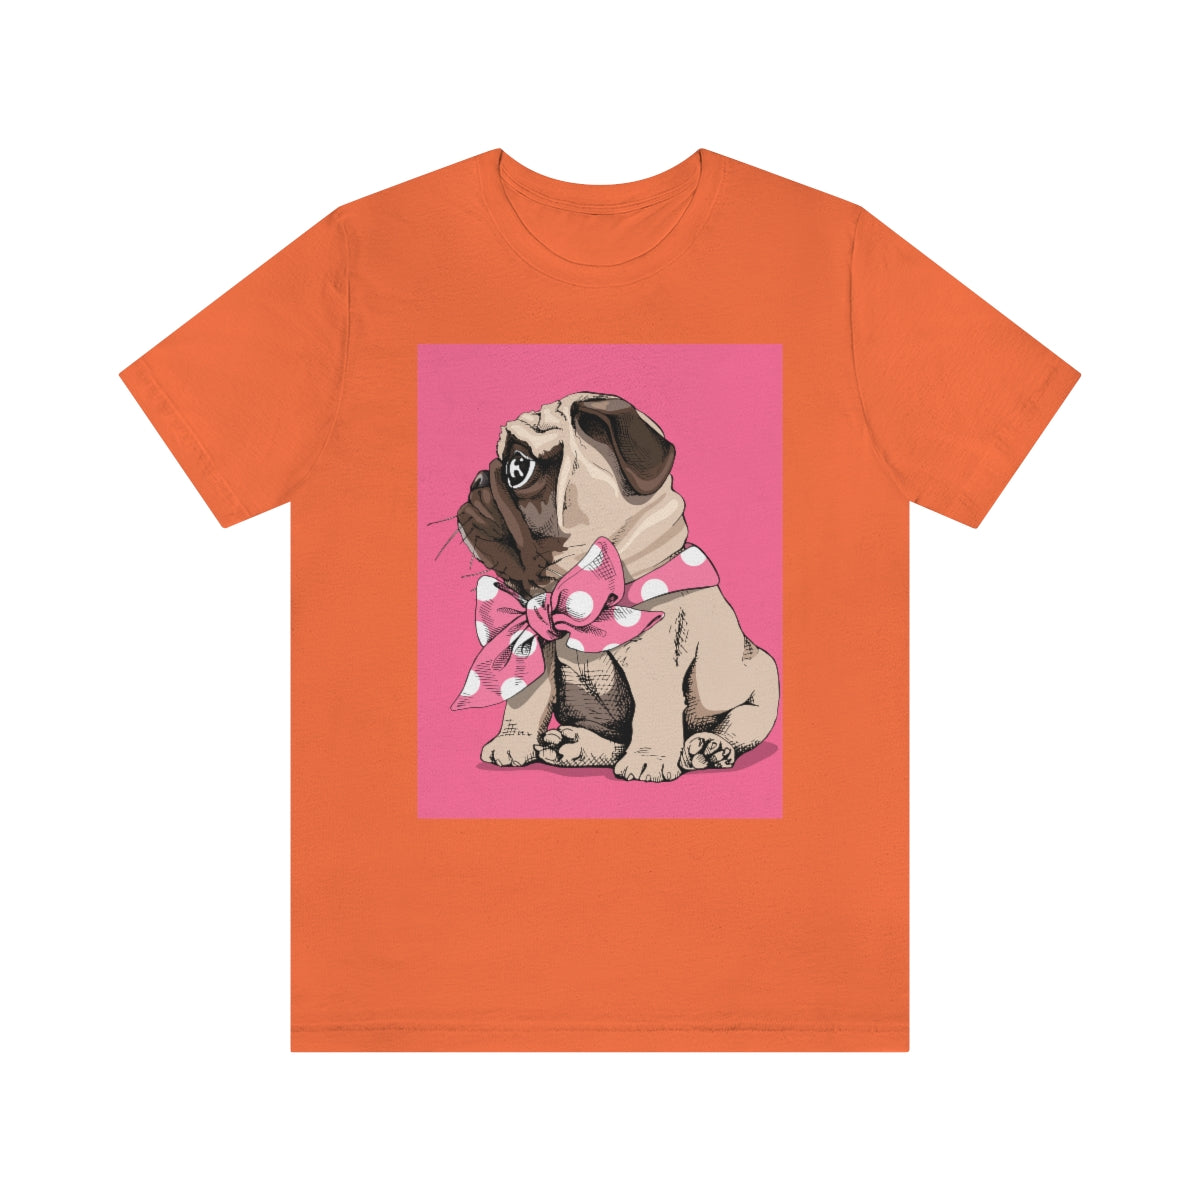 Unisex Jersey Short Sleeve Tee "Puppy Pug with a bow tie"